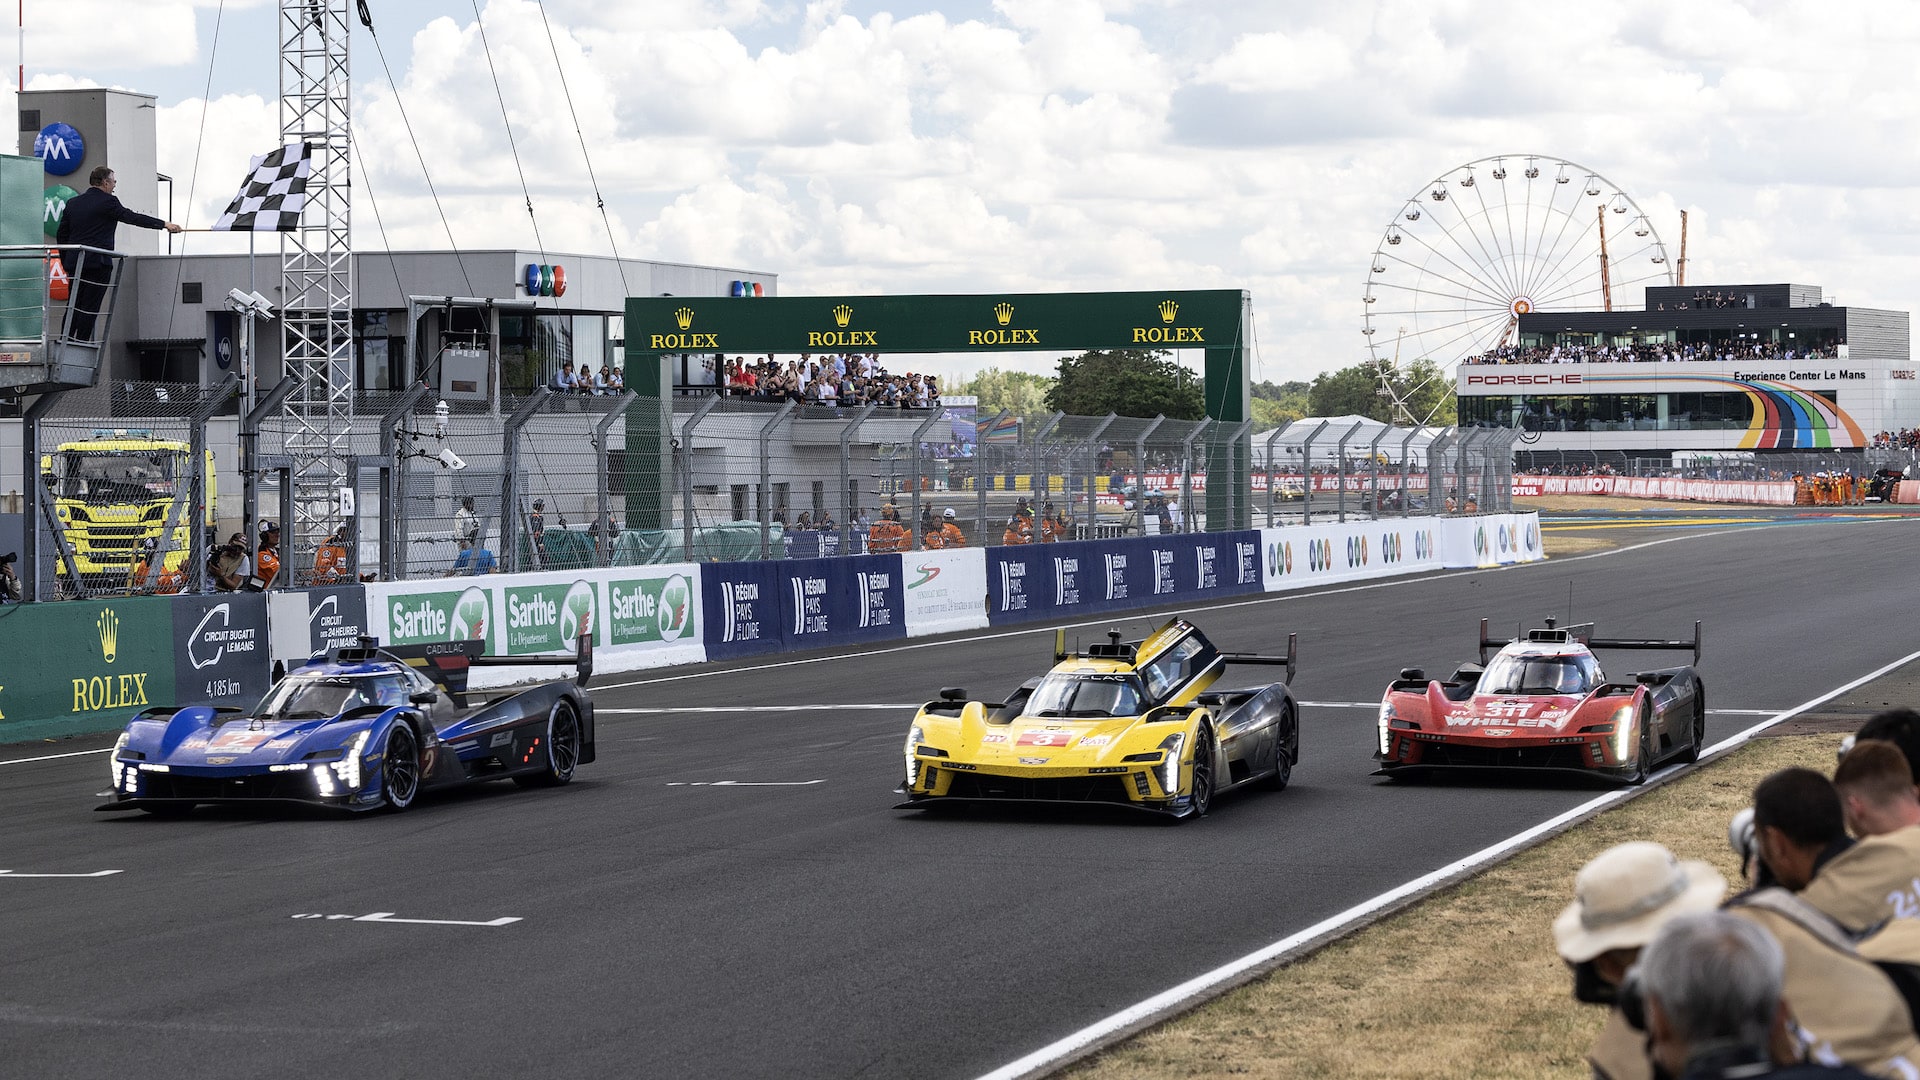 A podium finish at the Le Mans 24 Hours